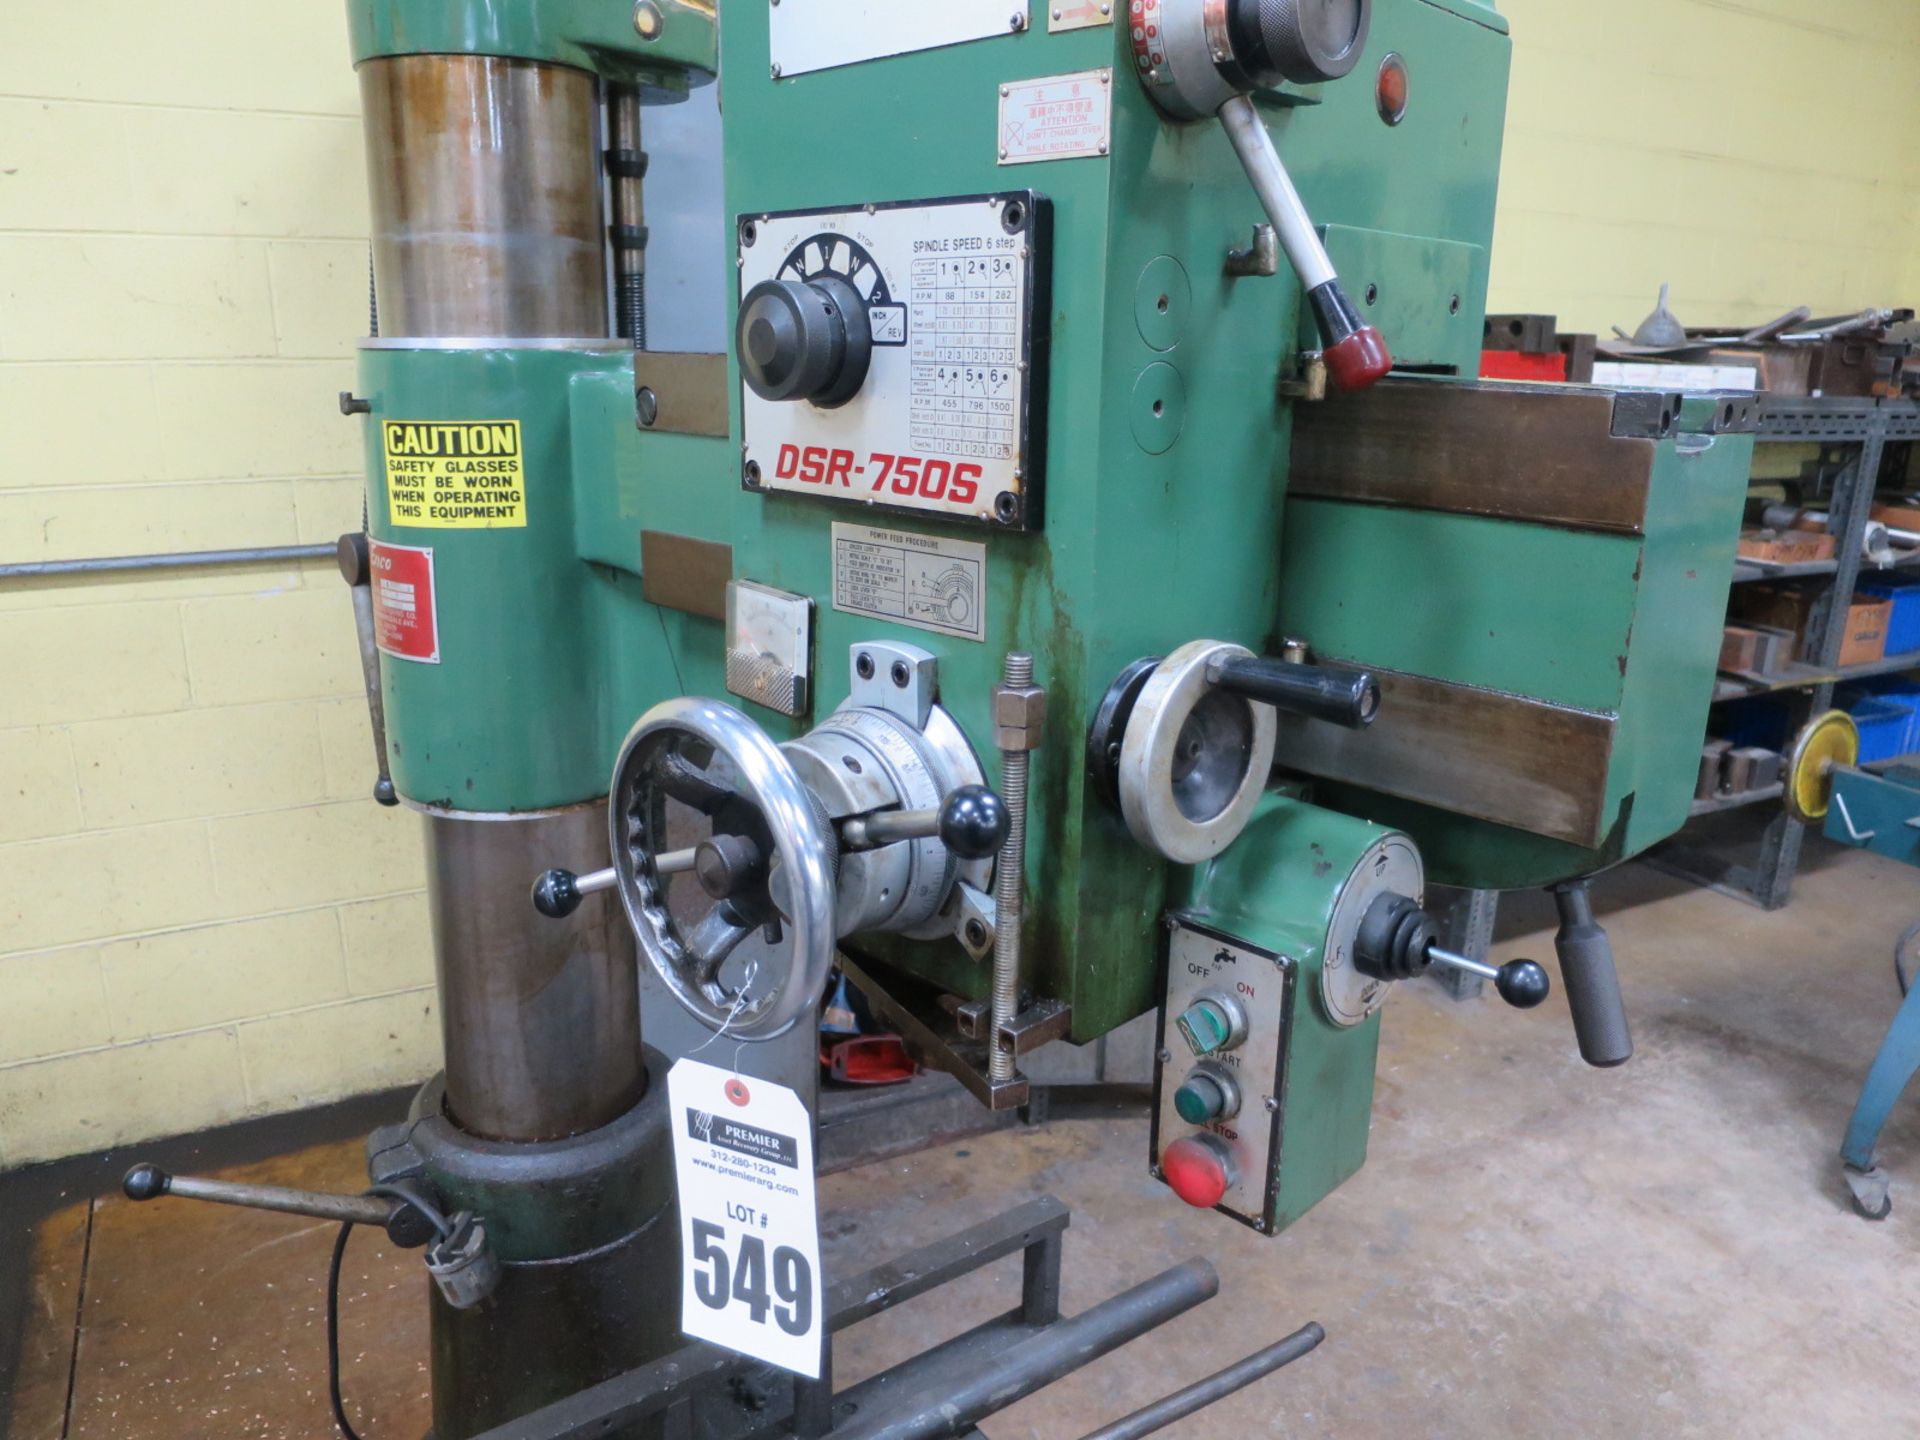 Enco Radial Arm Drill 128-4220, Dsr-750S Control, Sn 19856 - Image 4 of 5